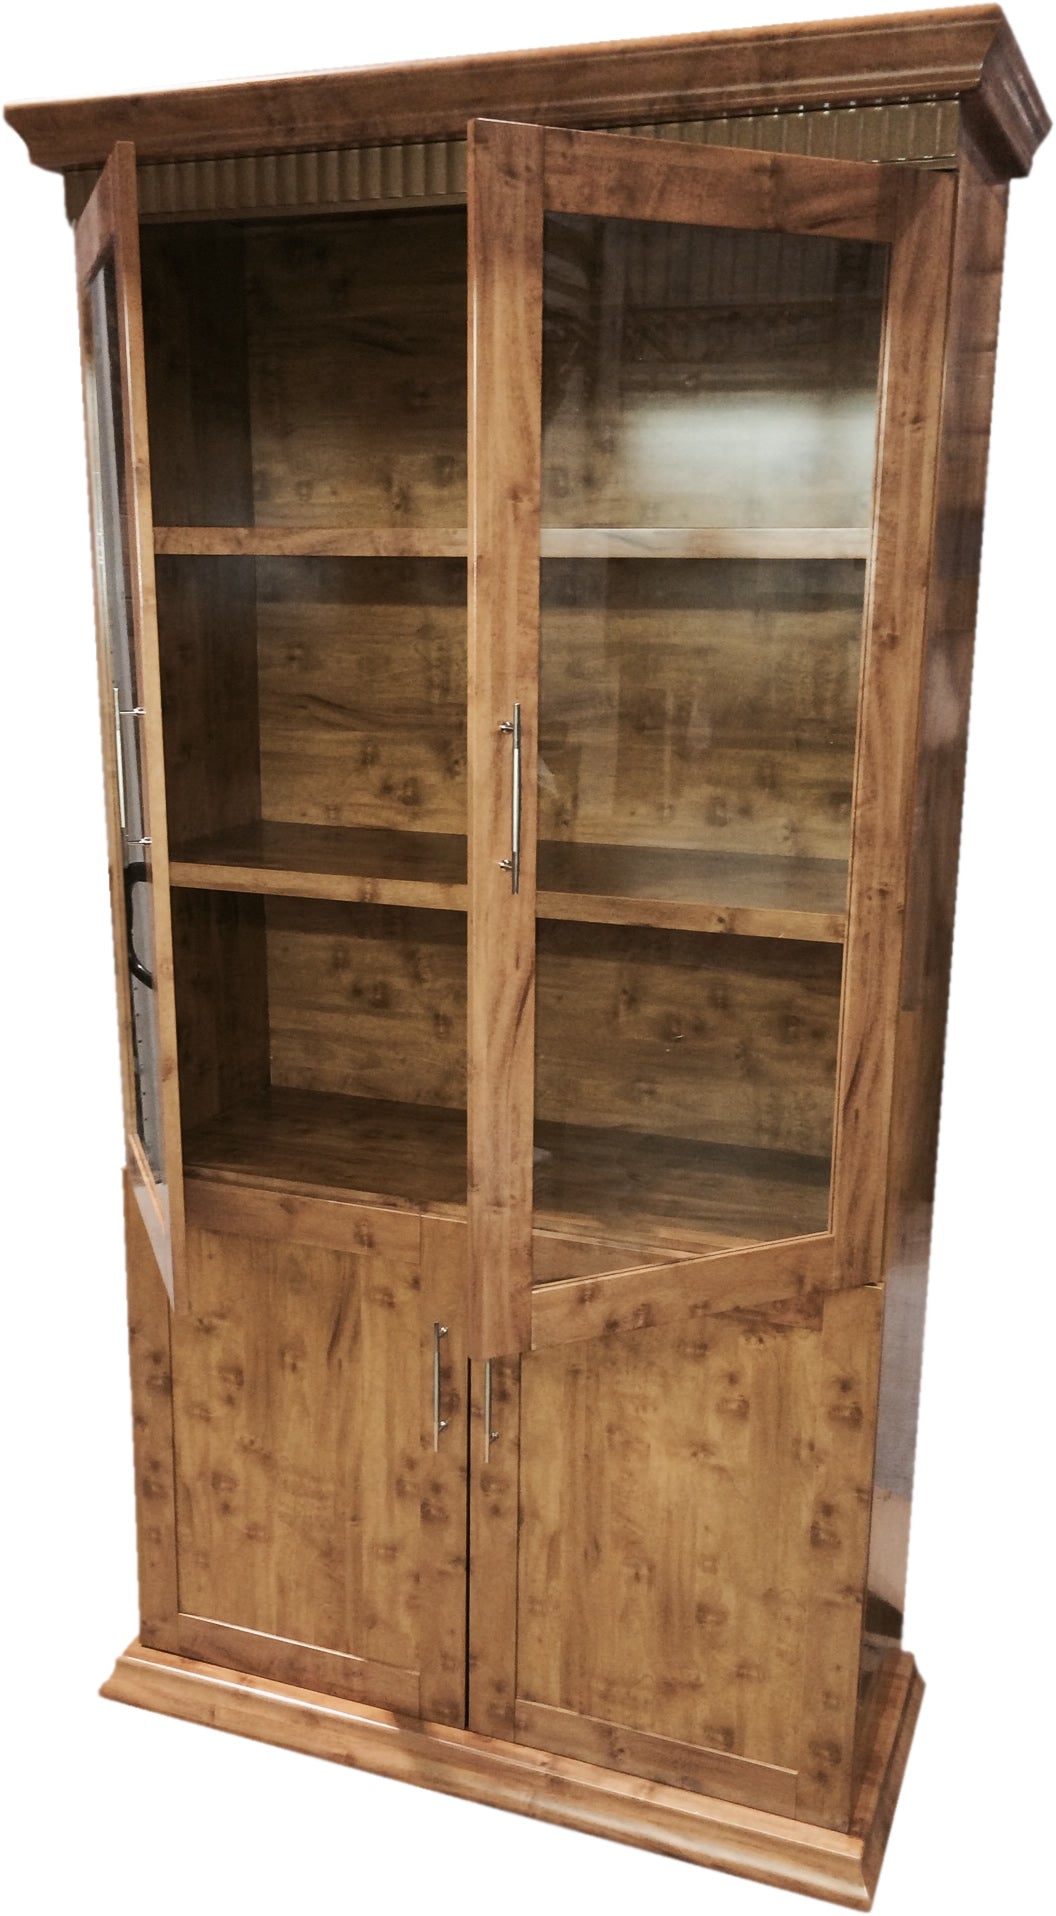 Yew Luxury Bookcase 2 Doors Wide DES-1862A-2DR Huddersfield